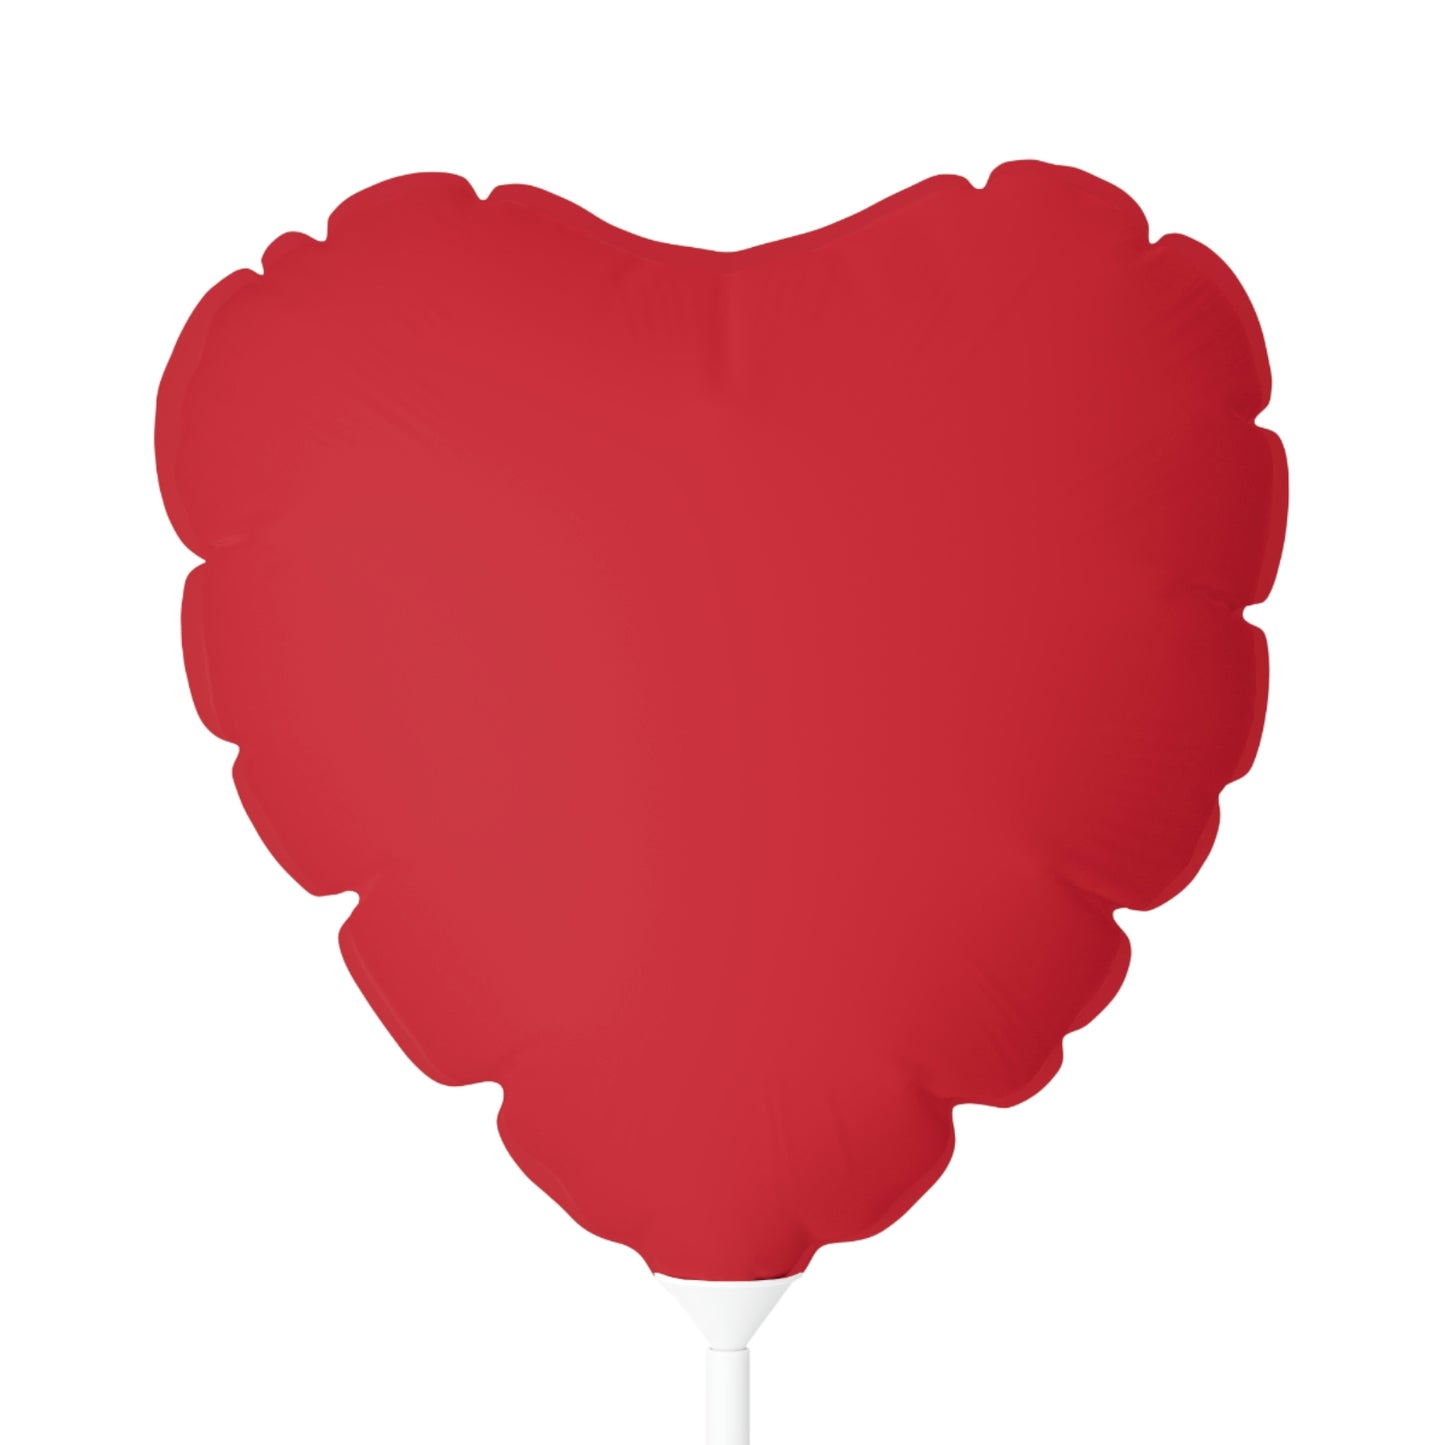 Balloon (Round and Heart-shaped), 11"